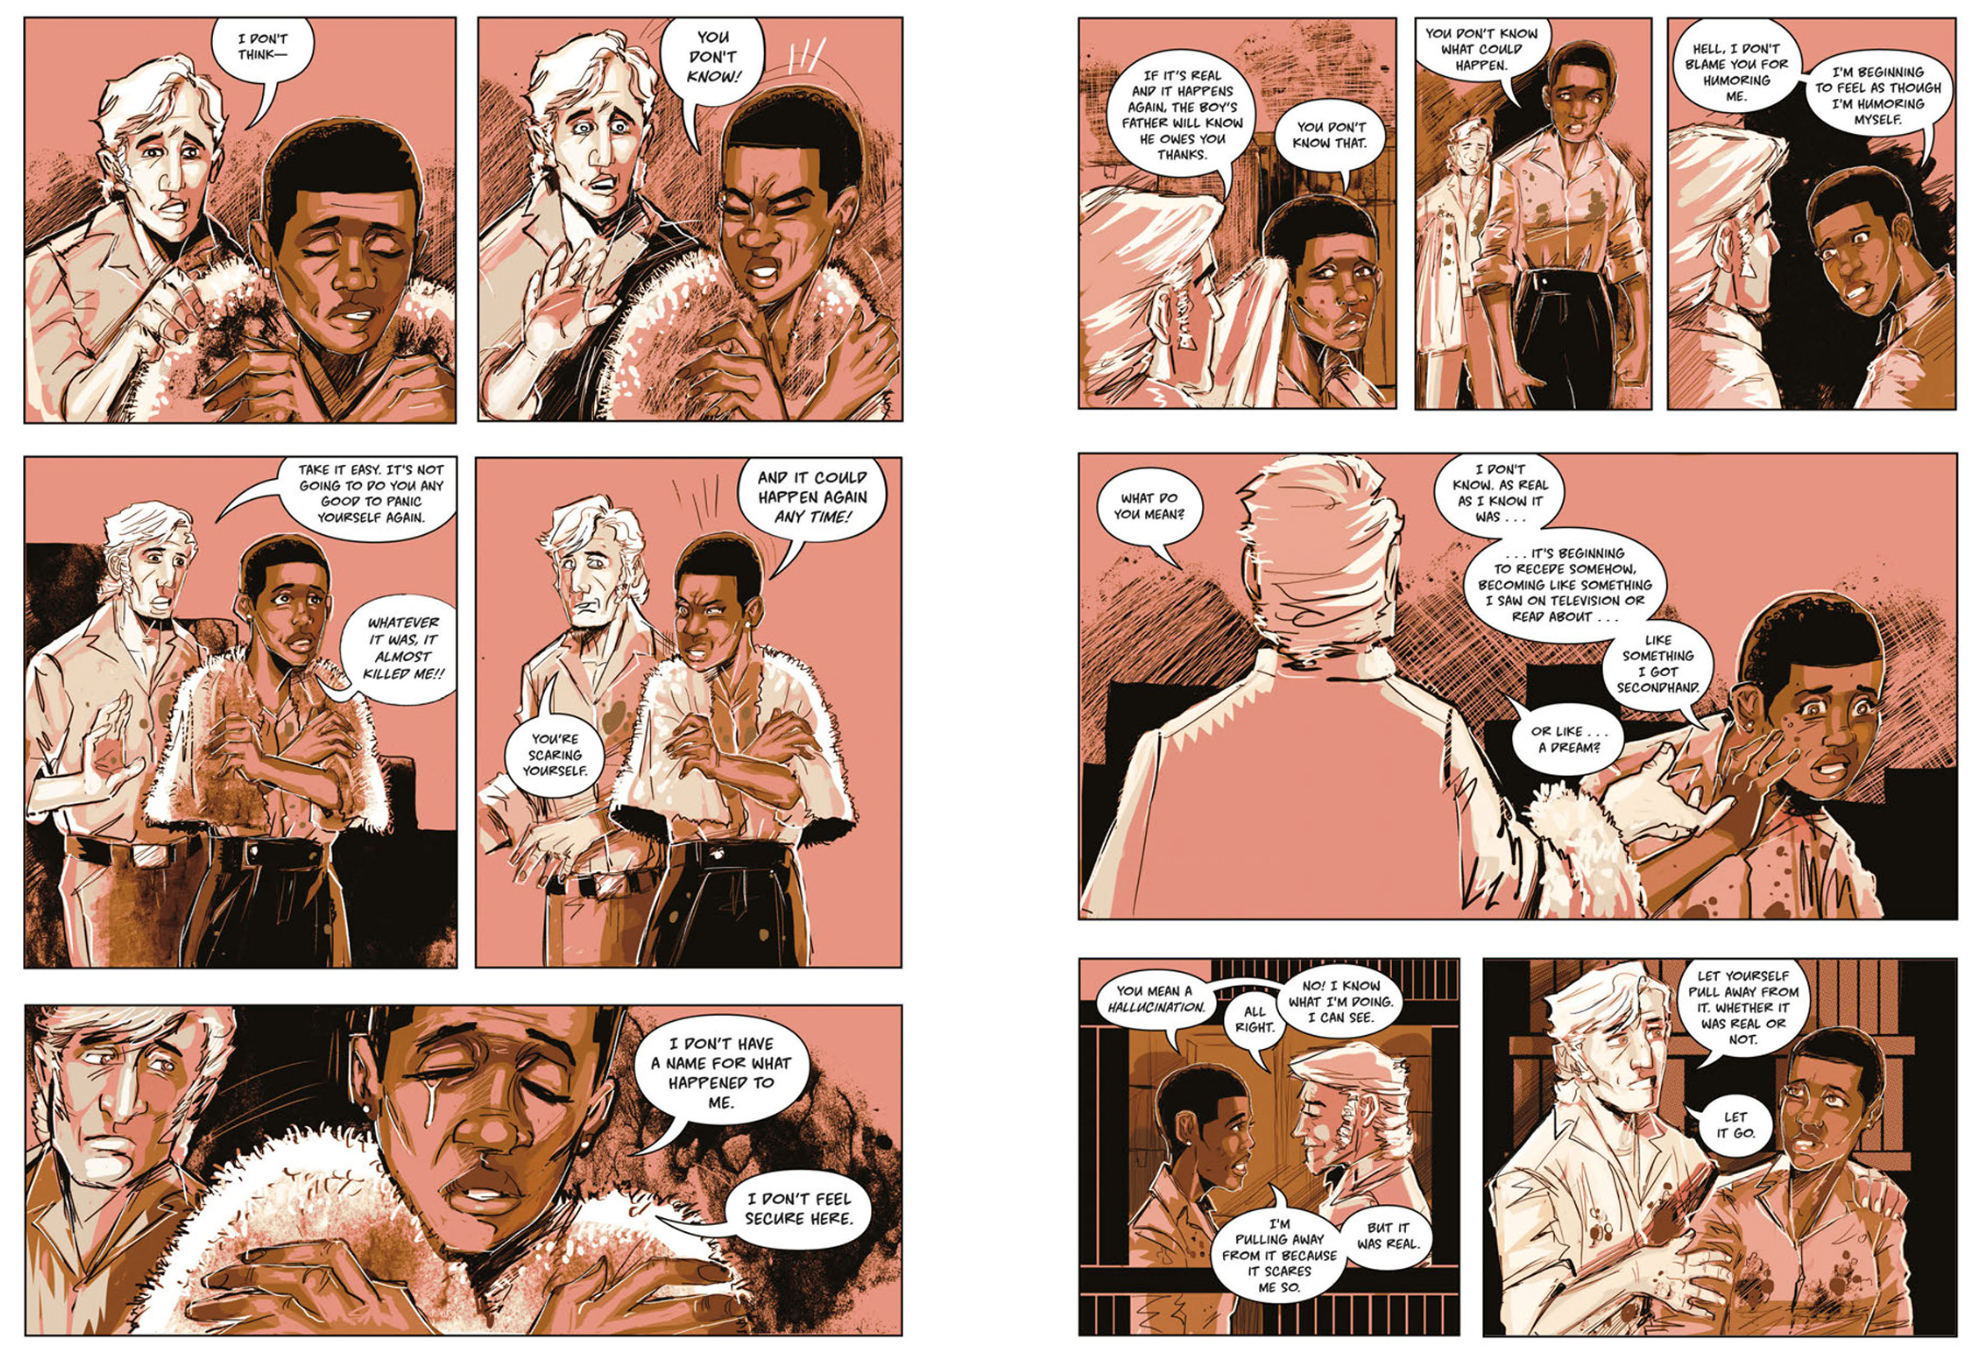 The Kindred Graphic Novel Should Be Everyone’s Introduction To Octavia Butler